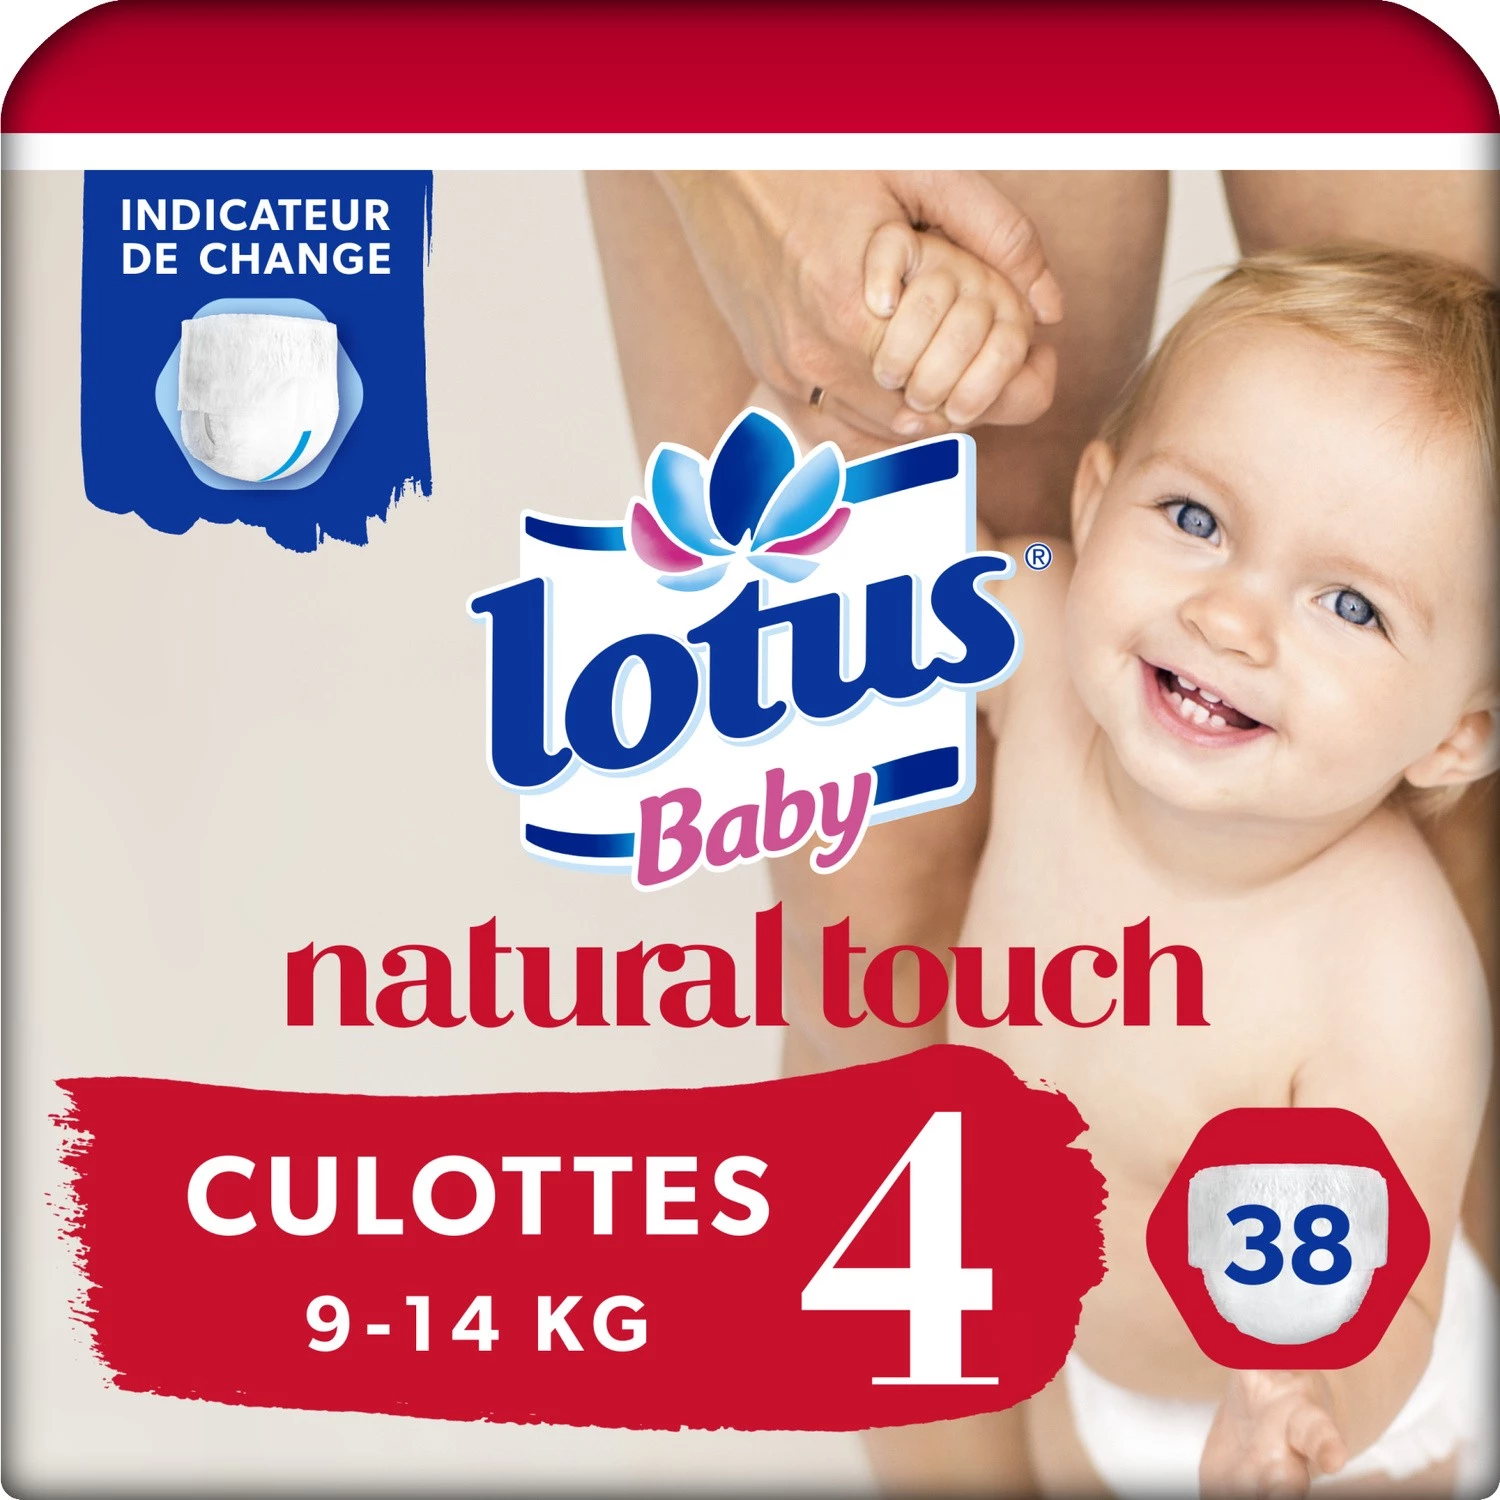 Divani-coulotte natural touch T4 x38 - LOTUS BABY